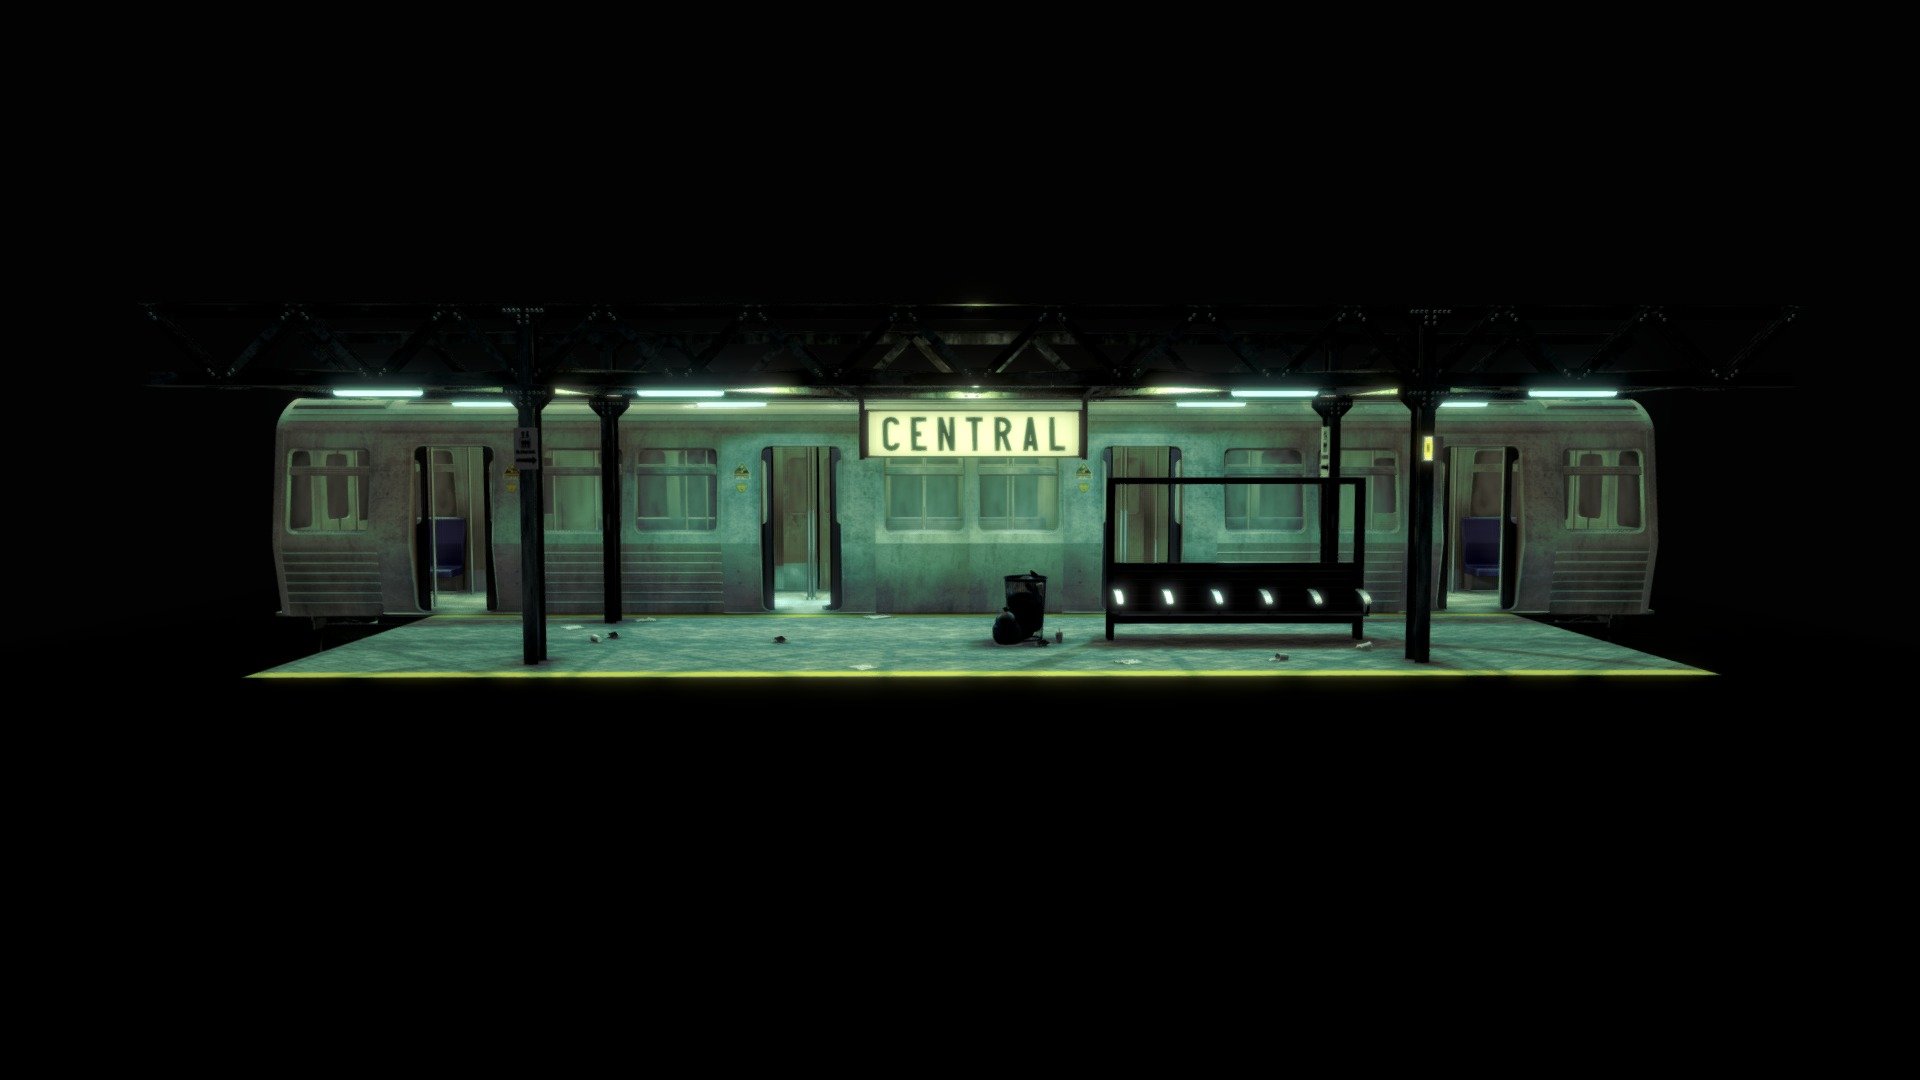 Central station train platform, modeled after and inspired by Sidney's Central station, the train is inspired by NY subway carts, to give a more urban feel to the scene.

I used some kits I modeled myself for the architecture and the train, u can get yourself the kits or just have a look if you're just curios here:
https://sketchfab.com/3d-models/iron-structure-kit-asset-8d0afc1801d549a7b72d4cb13506f324 - for the iron structure of the station
https://sketchfab.com/3d-models/modular-train-passenger-car-kit-e51536a9369d4885bb43e386ef0b0817 - for the train - Central Station - 3D model by Lorenzo Mugianesi (@lorenzo.mugianesi) 3d model